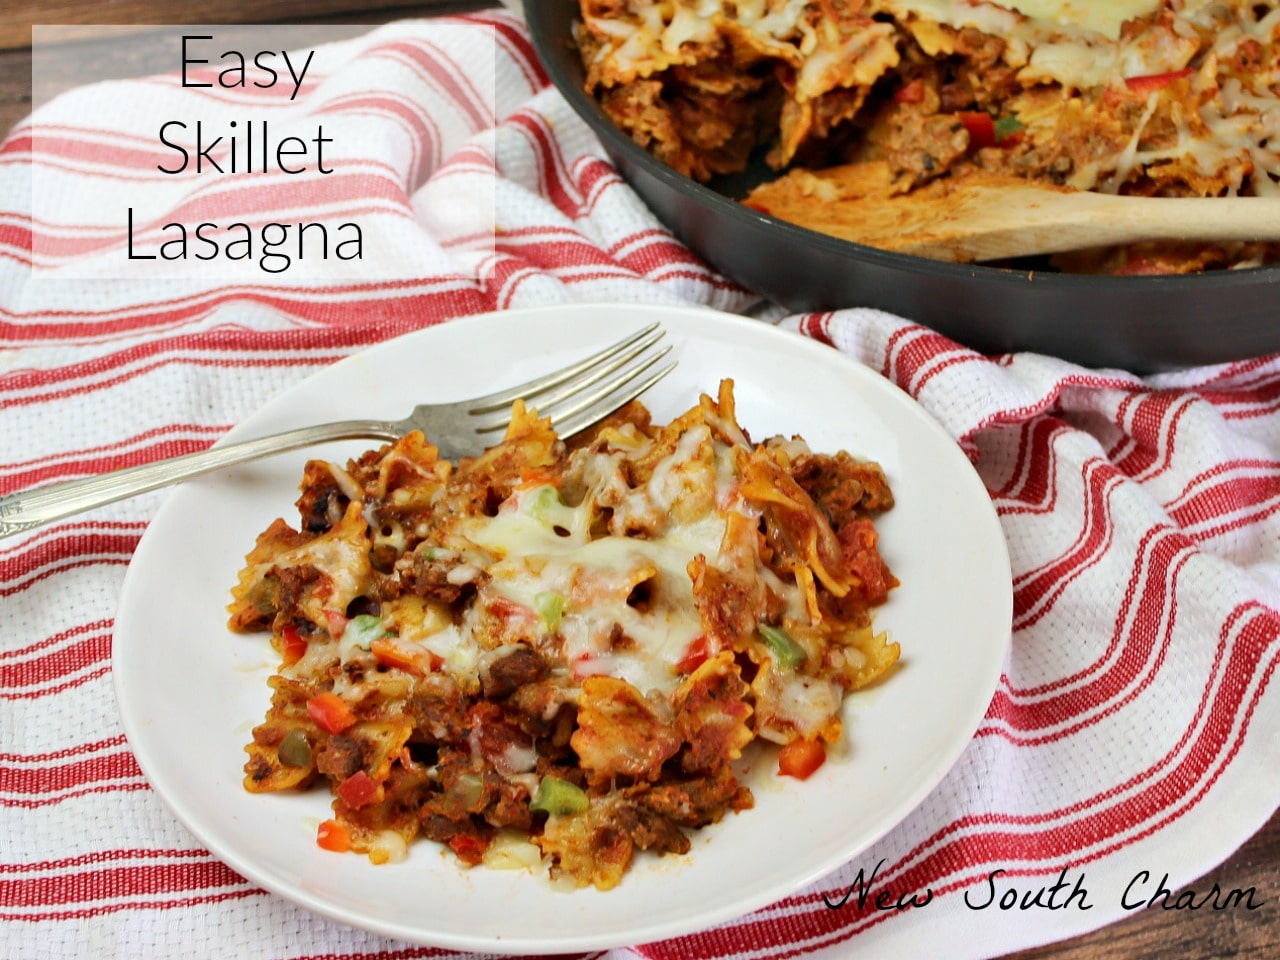 Easy Skillet Lasagna takes 30 minutes and cooks in one skillet making dinner a snap.